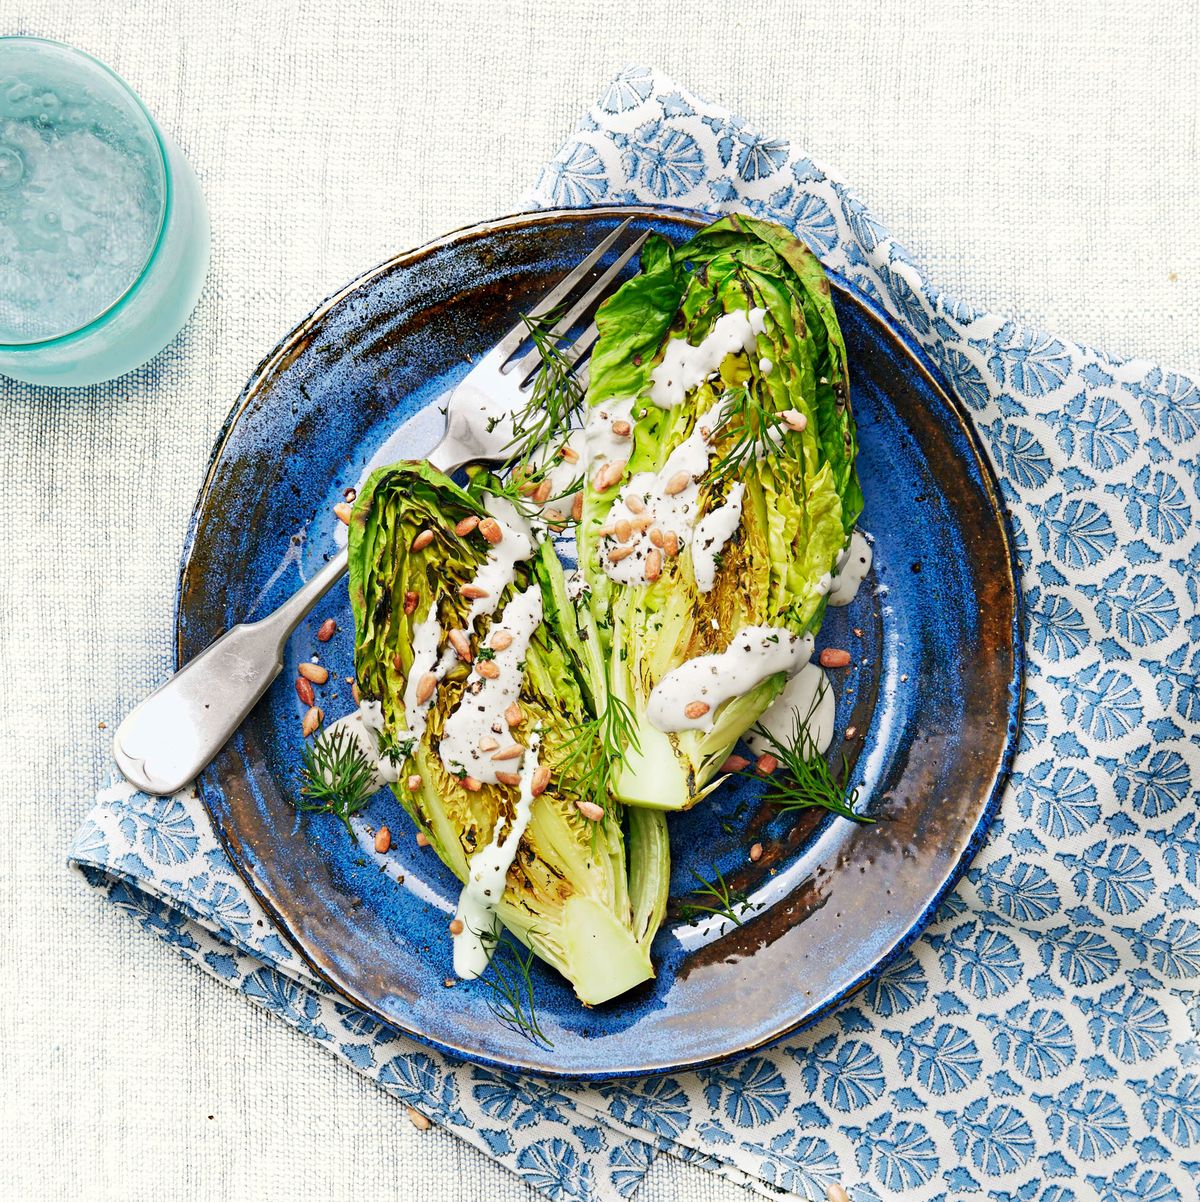 grilled romaine lettuce with creamy feta dressing